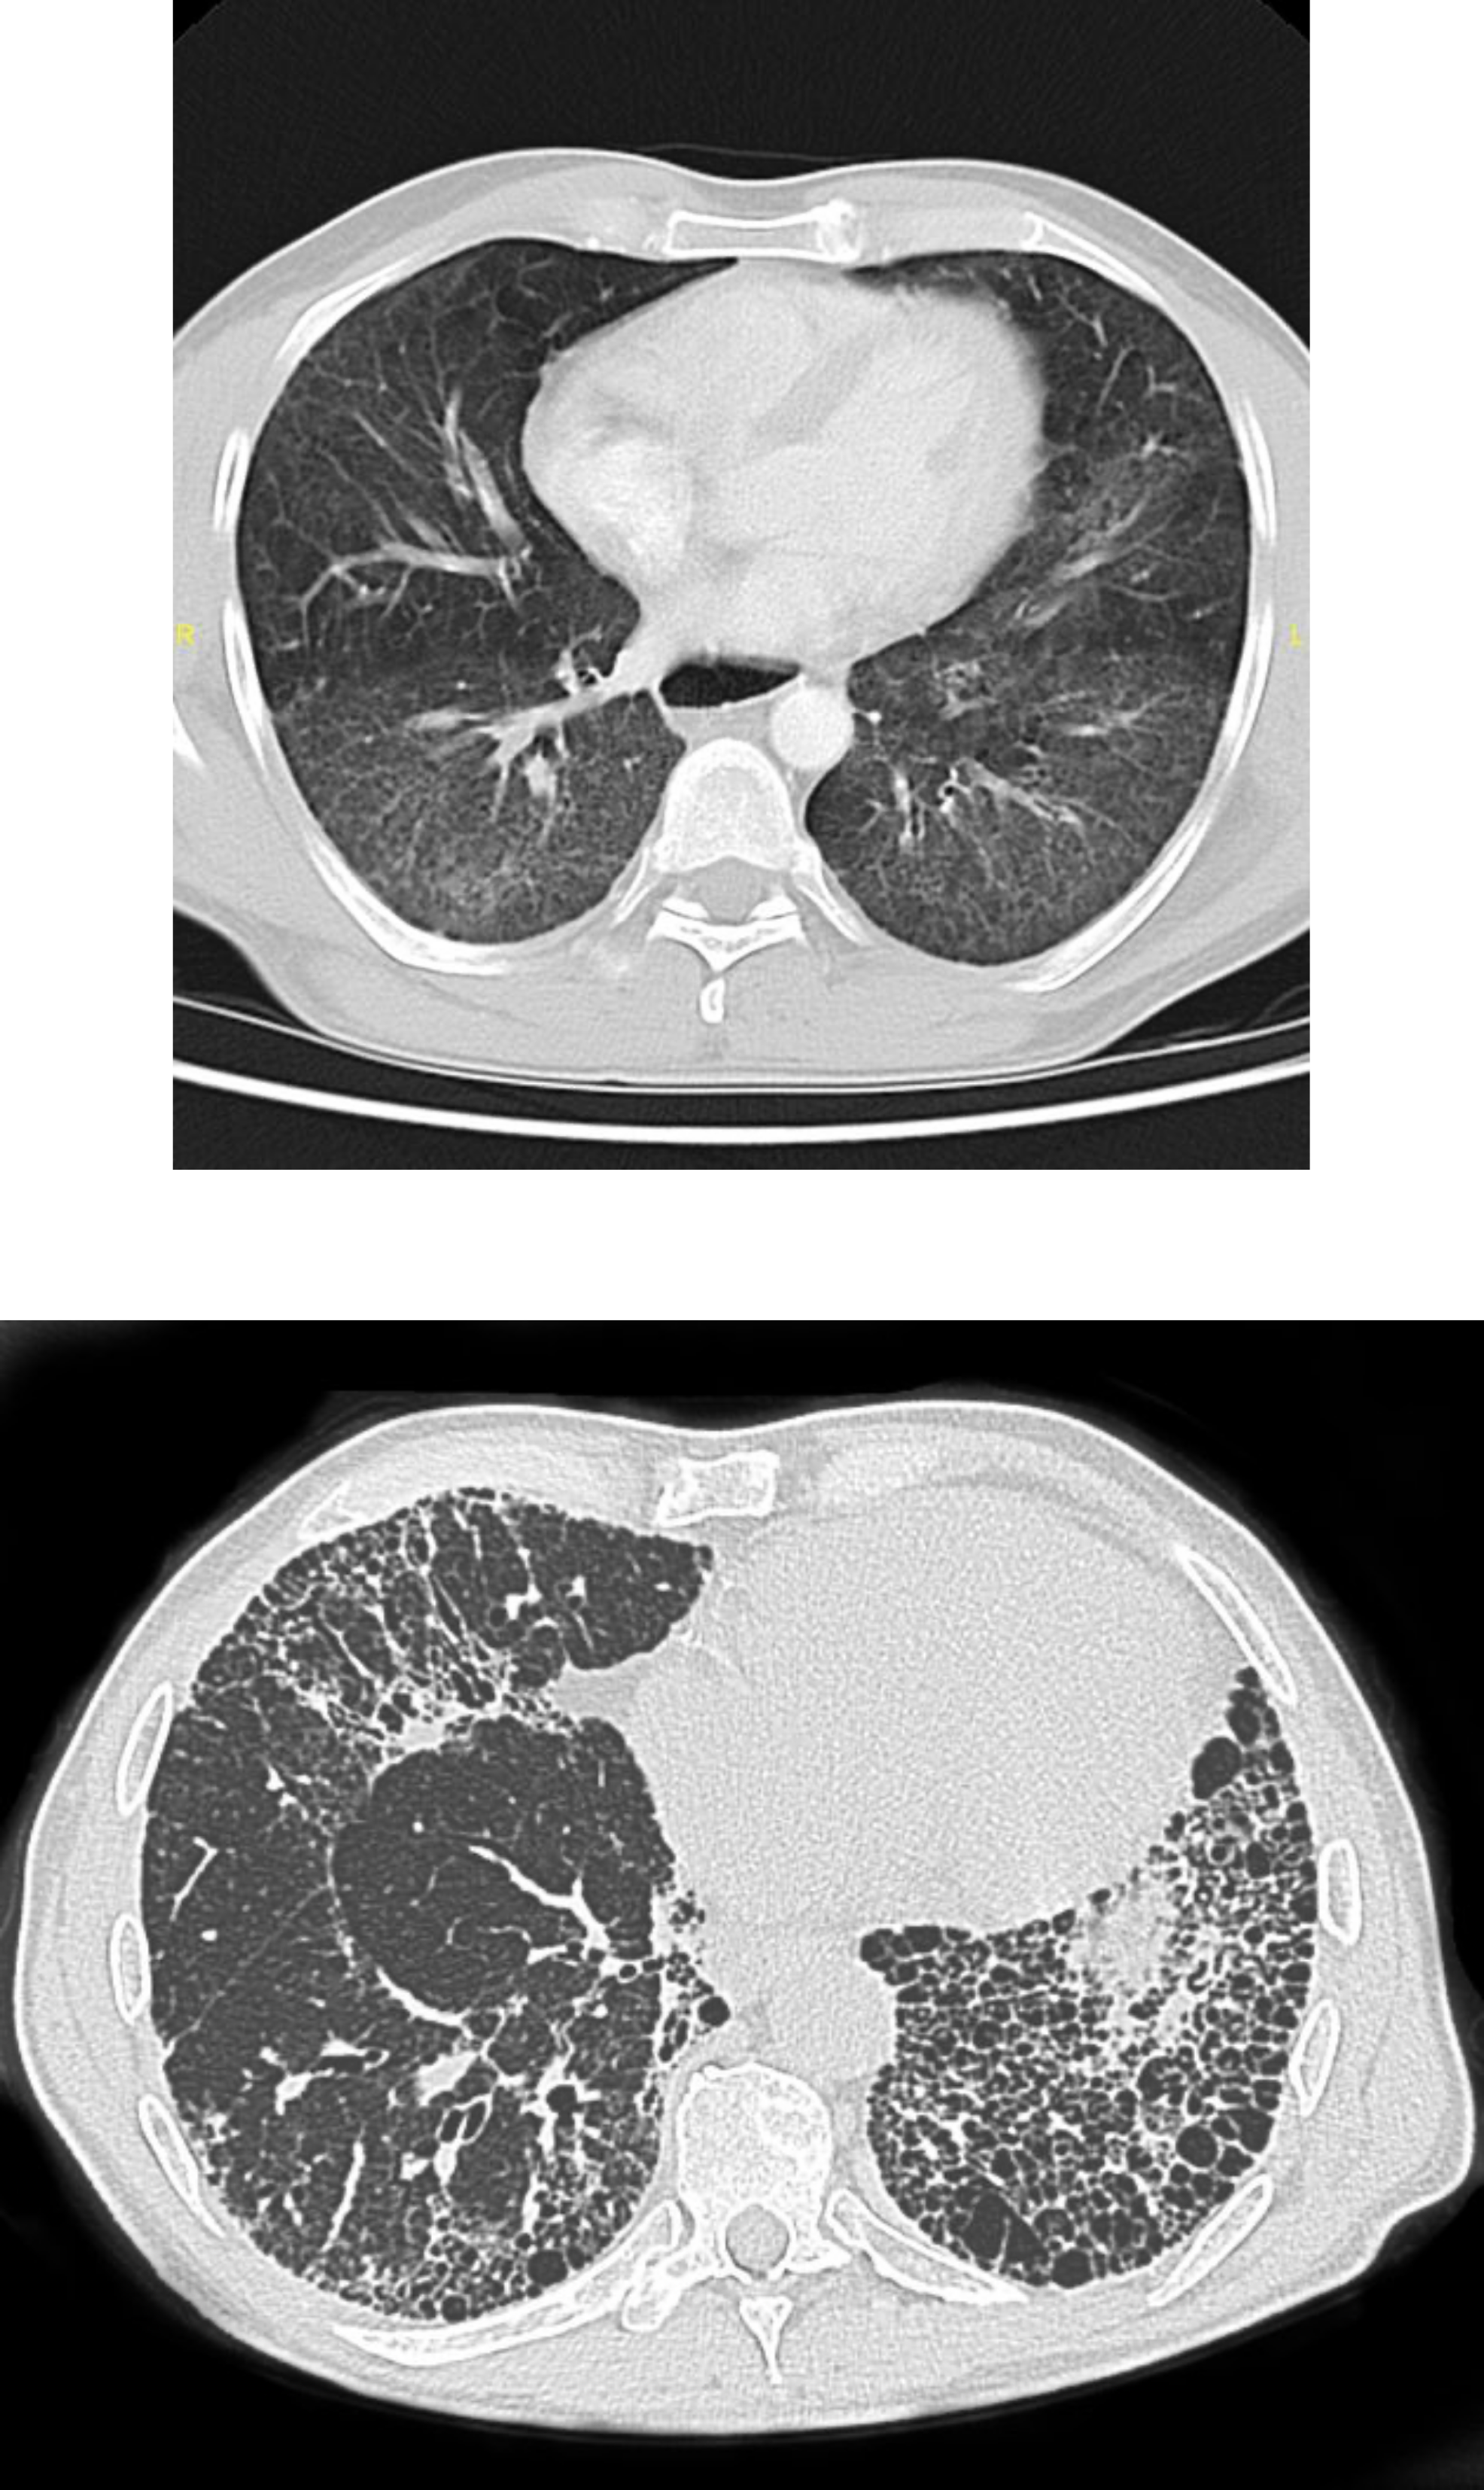 Two transverse CT images of the lung are shown. The first shows diffuse, thin white markings networking throughout the lung fields shown. THe Second shows more course white markings, also throughout the lungs and these thicker markings form numerous adjacent circles that look like a honeycomb.